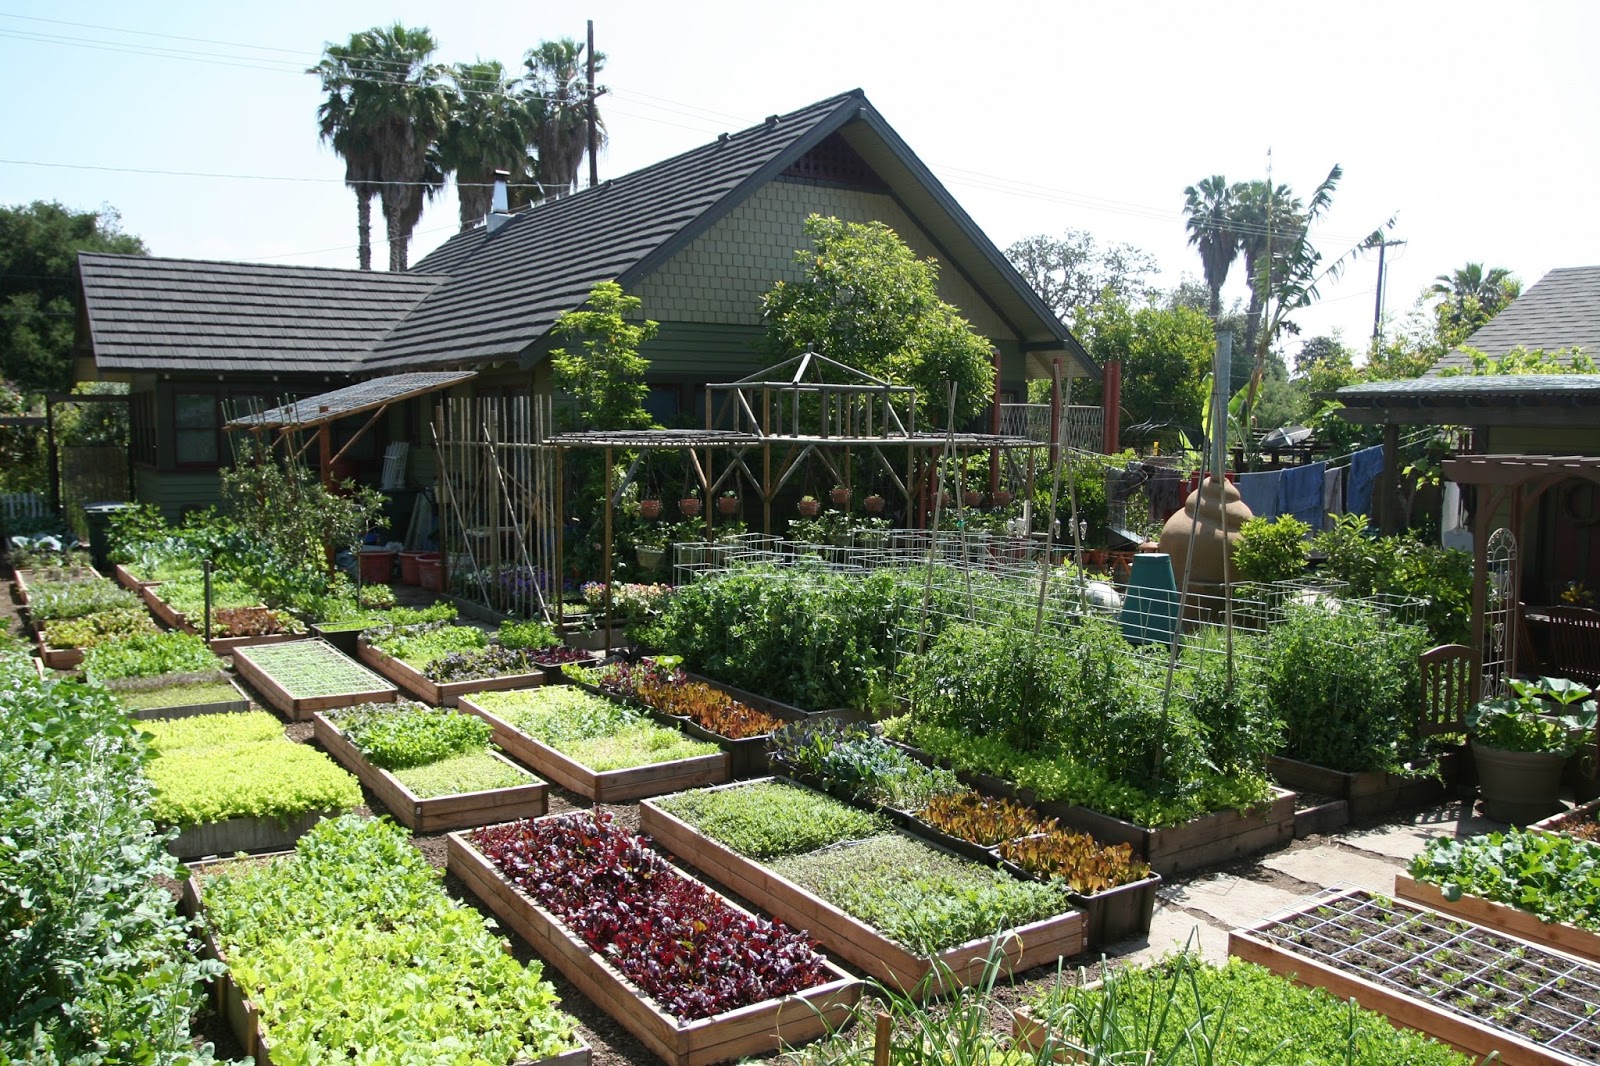 Learn How This Family Grows 6,000 Lbs Of Food on Just 1/10th Acre